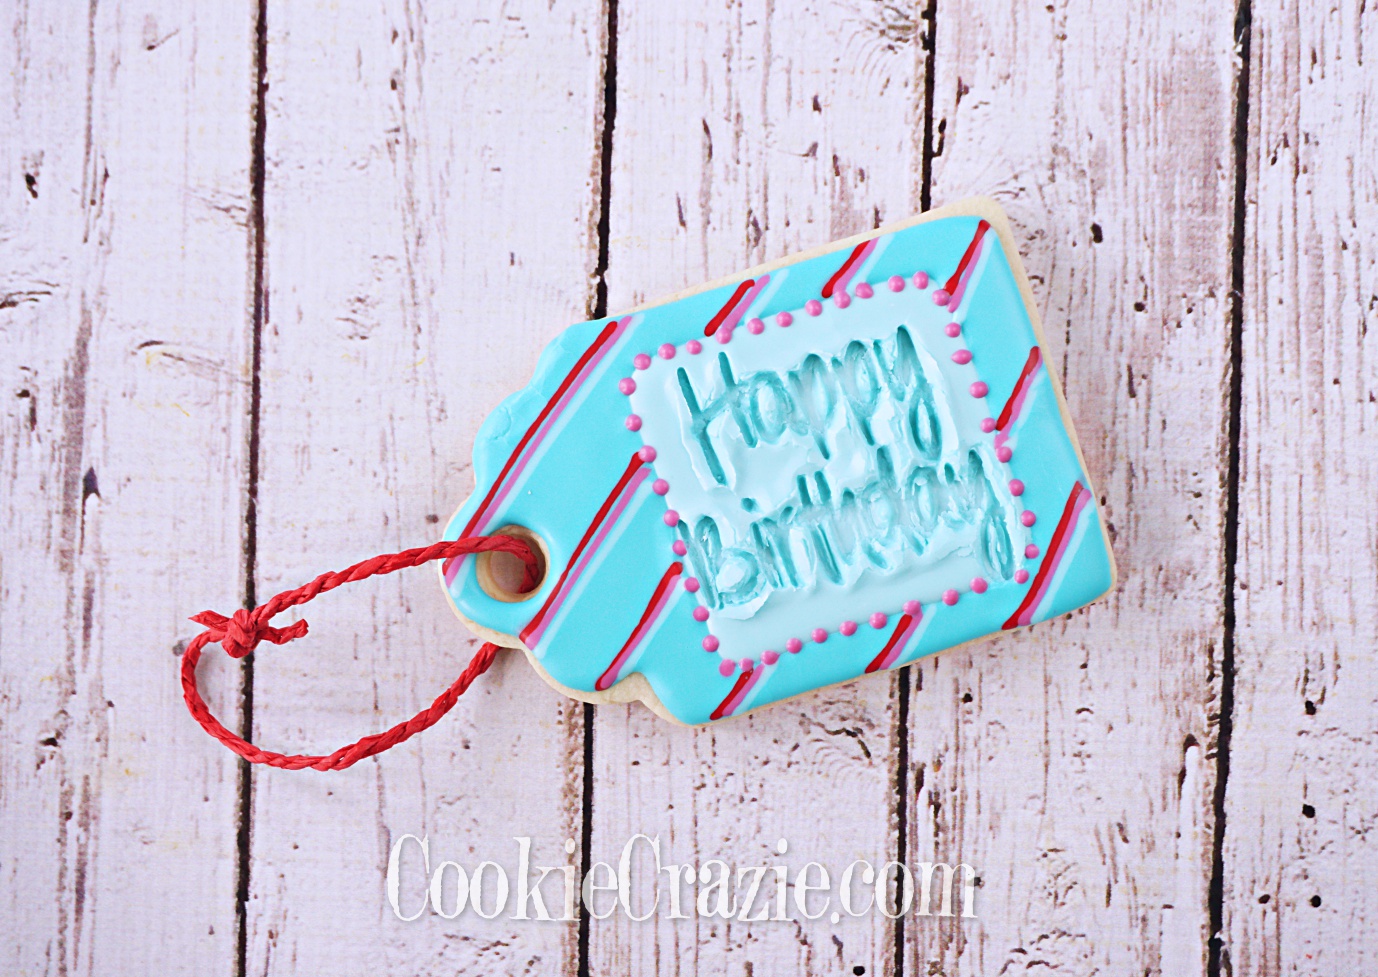  Happy Birthday Gift Tag Decorated Sugar Cookie YouTube video  HERE  